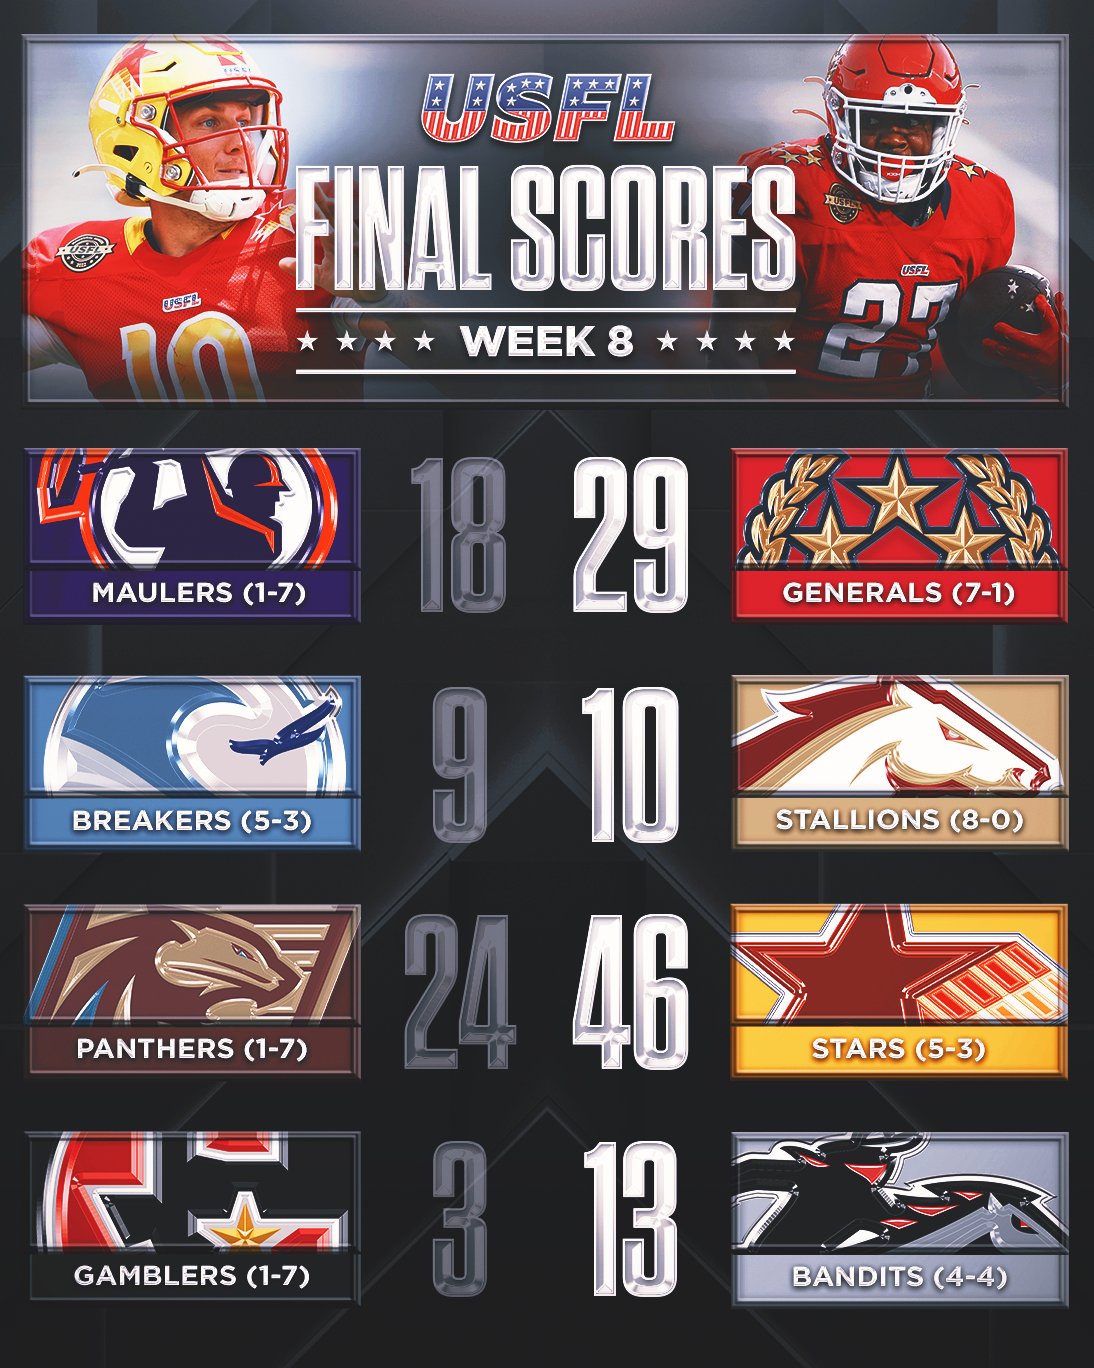 CHAMPIONSTALLIONS on Twitter "RT USFL Week 8 is officially in the